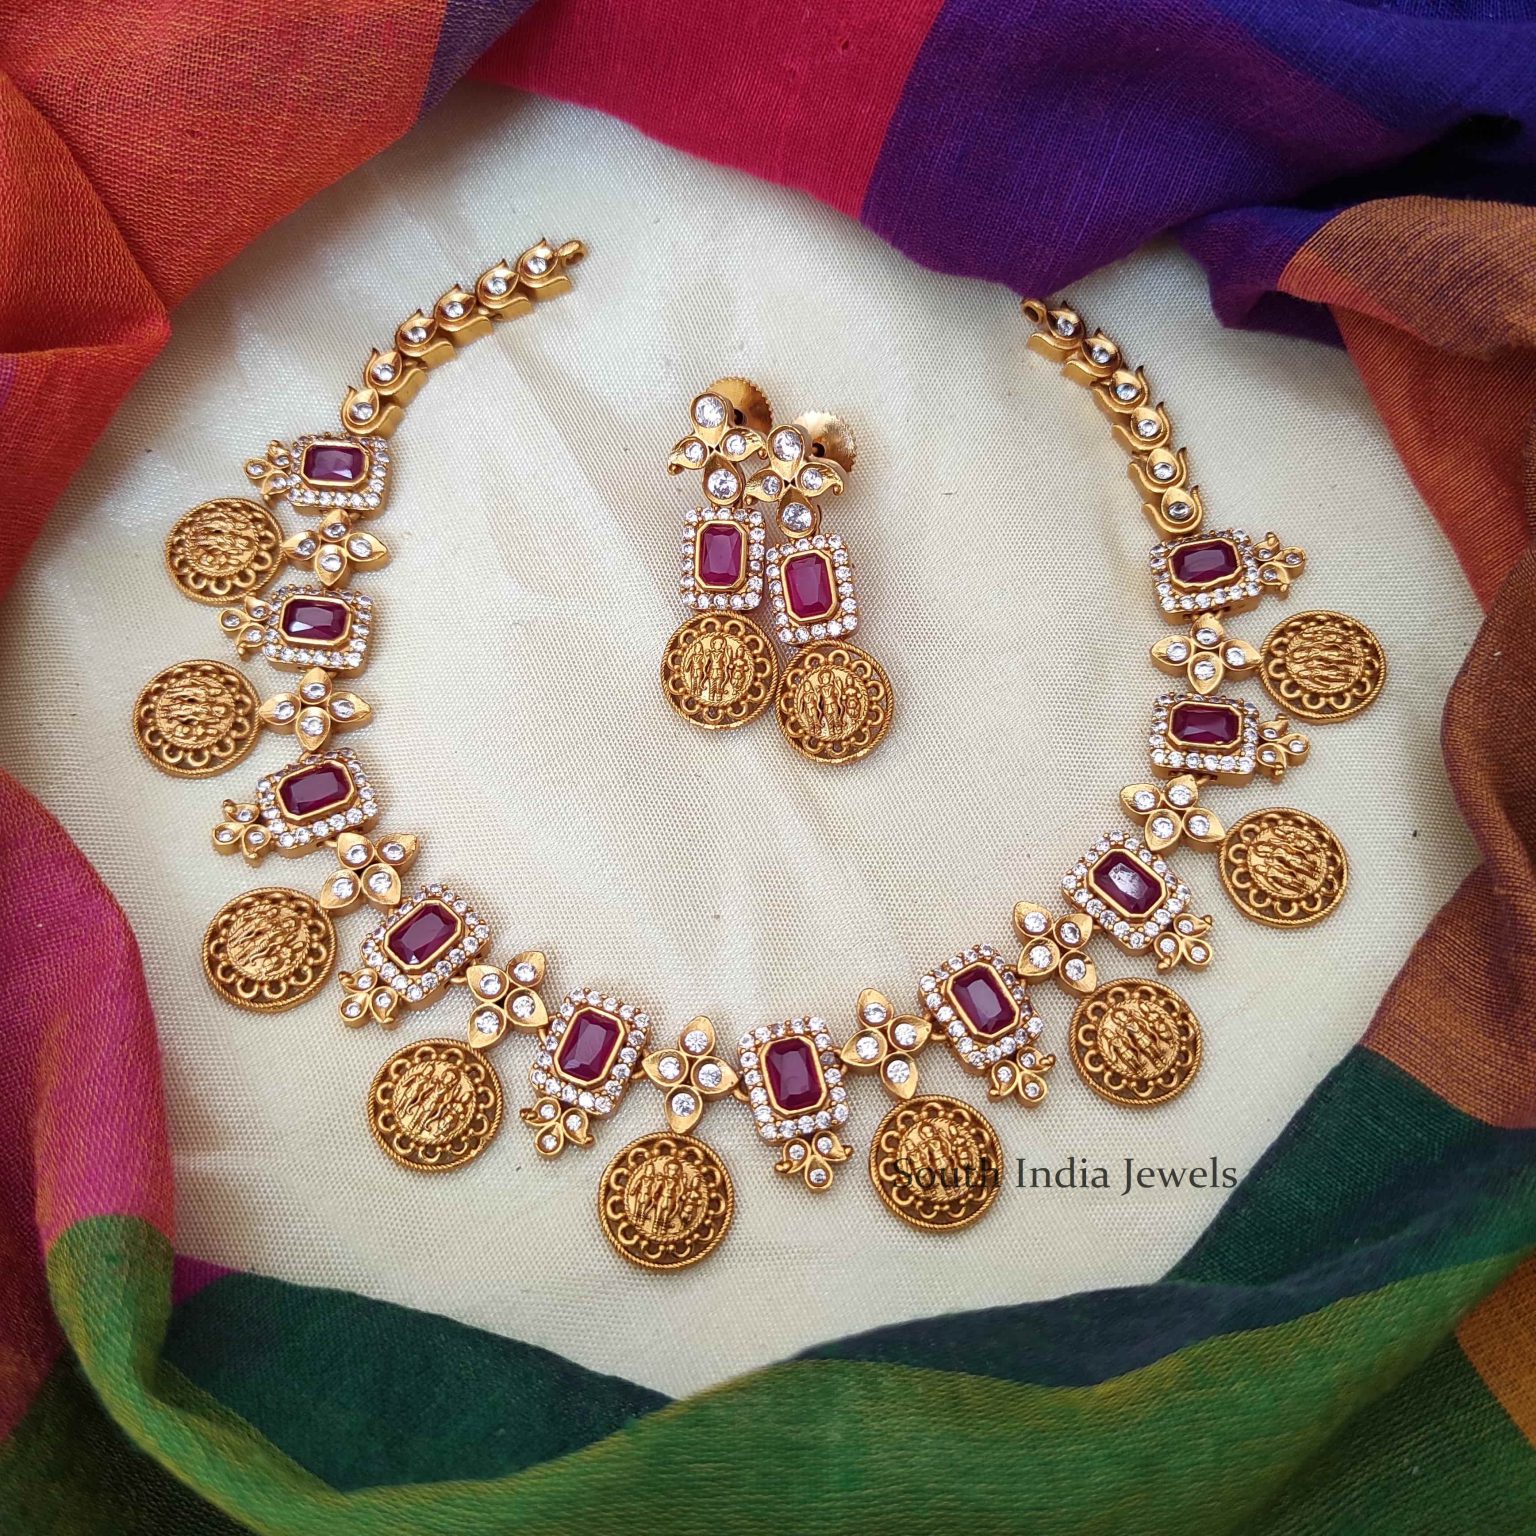 Unique Ramparivar Necklace with Earrings - South India Jewels